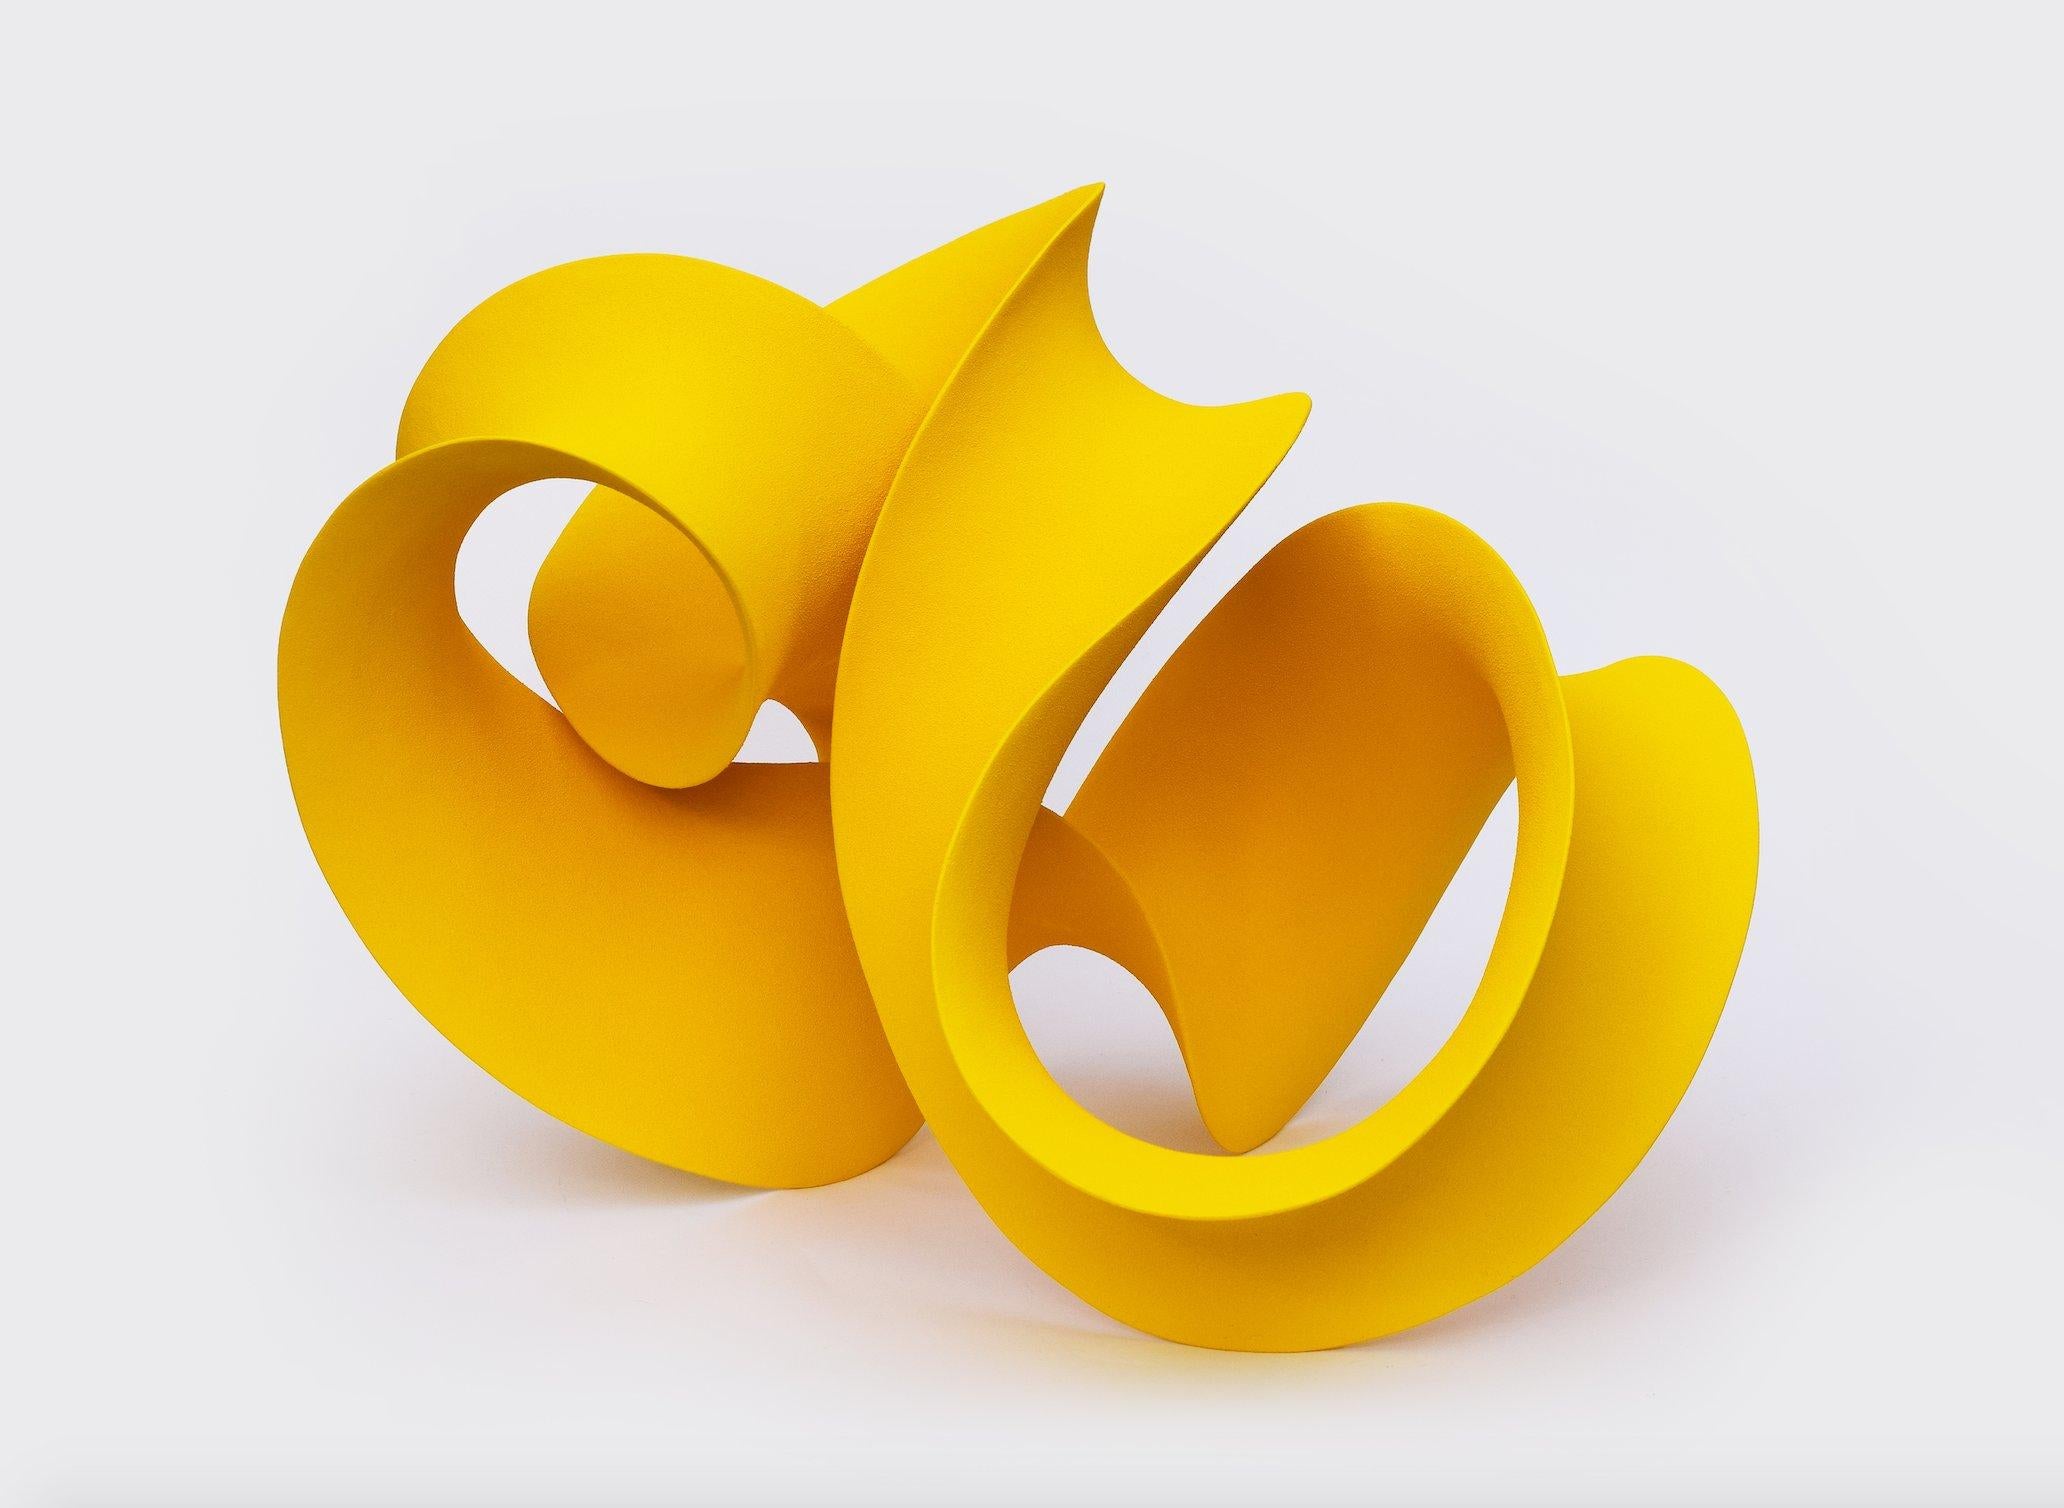 Ceramic Yellow Curved Abstract Contemporary Sculpture by Merete Rasmussen For Sale